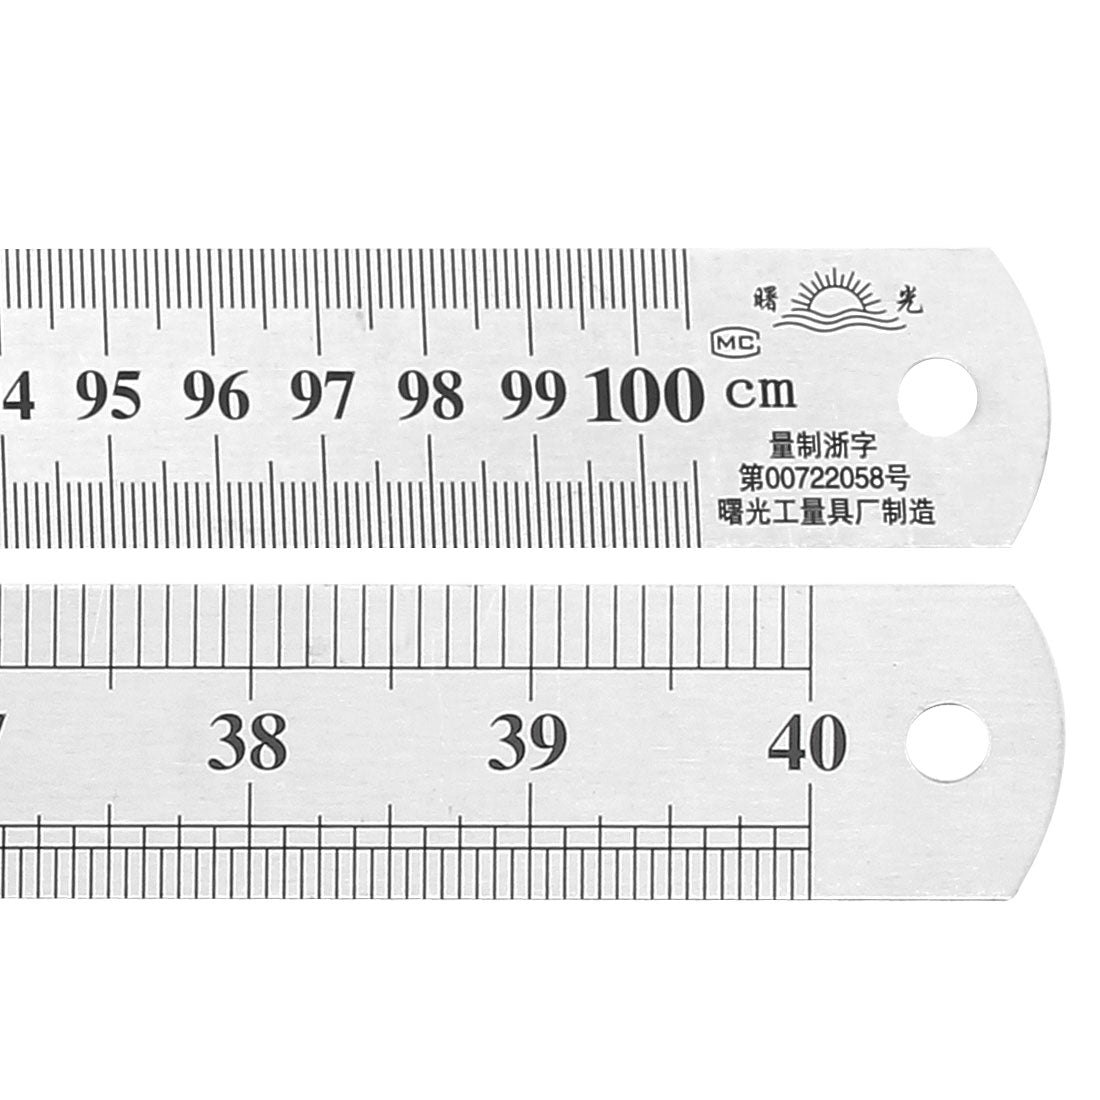 uxcell Uxcell Straight Ruler 1m 40 Inch Metric / Imperial Egde Scale Stainless Steel Ruler 100cm Measuring Tool 1mm Precision